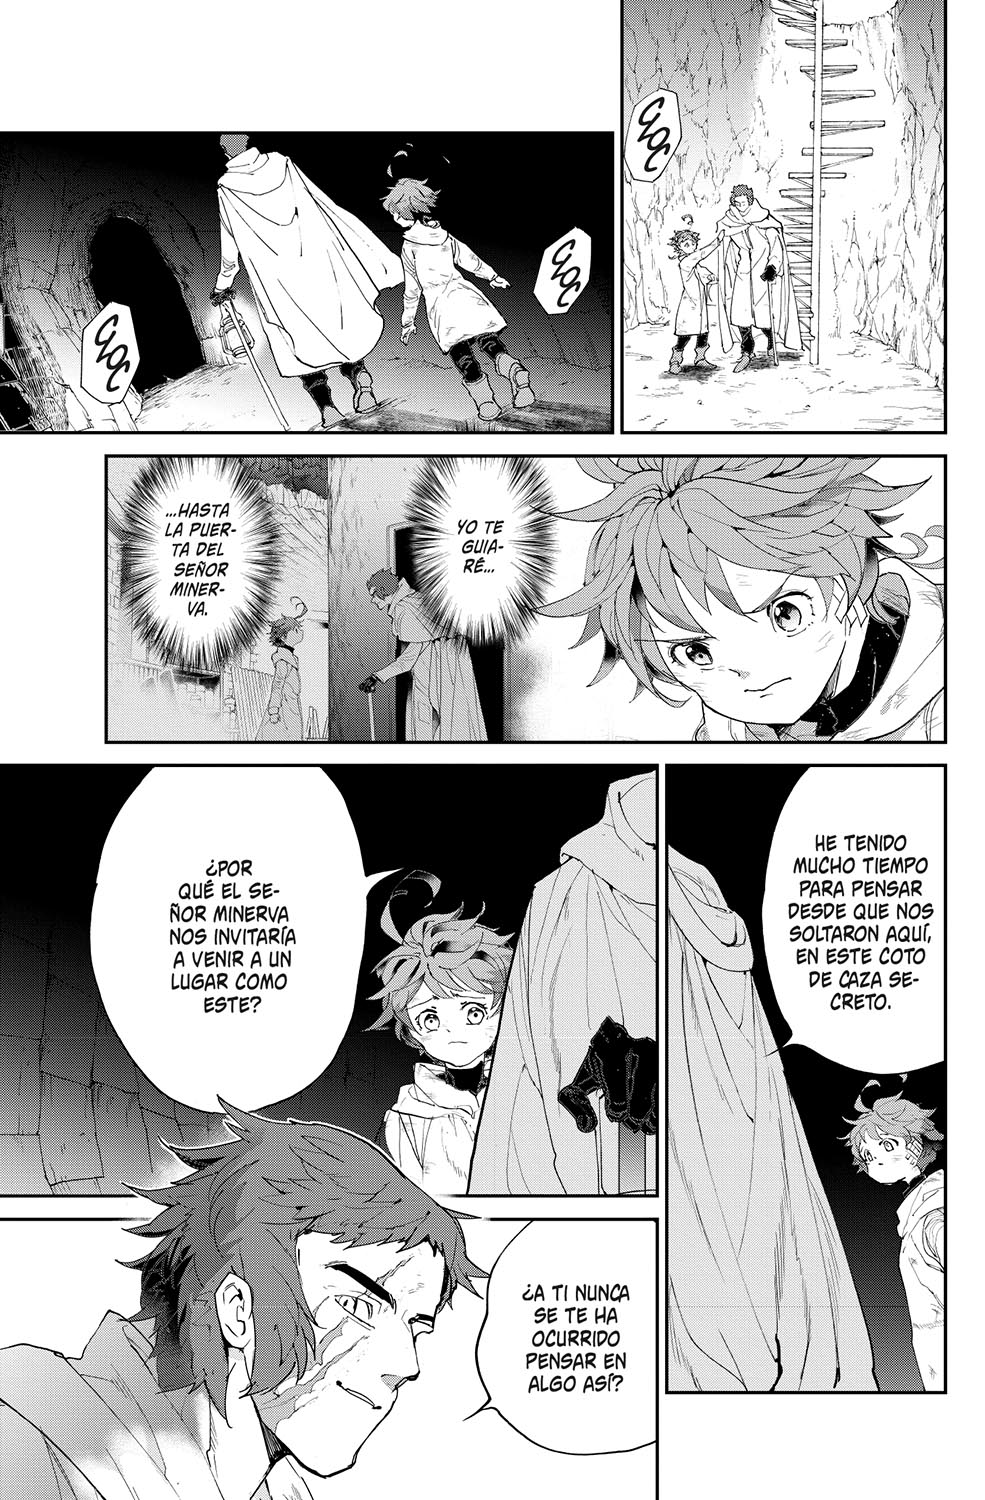 The Promised Neverland 9 Norma Editorial 